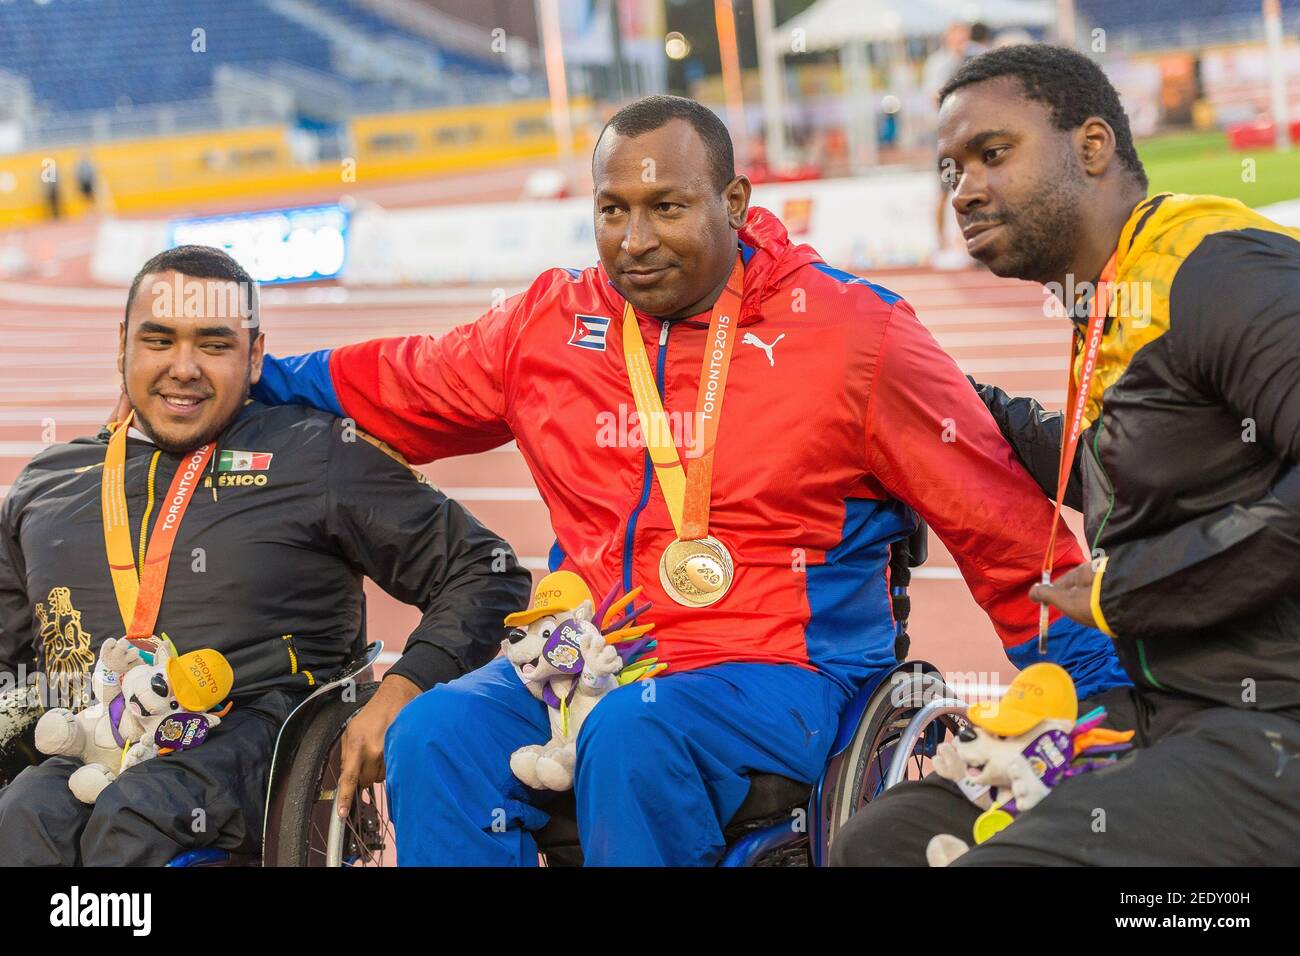 Leonardo Diaz from Cuba wins the gold medal in the Men's Discus Throw F54/55/56 Final during the Toronto Parapan Am Games. Tanto Cambell (right) from Stock Photo